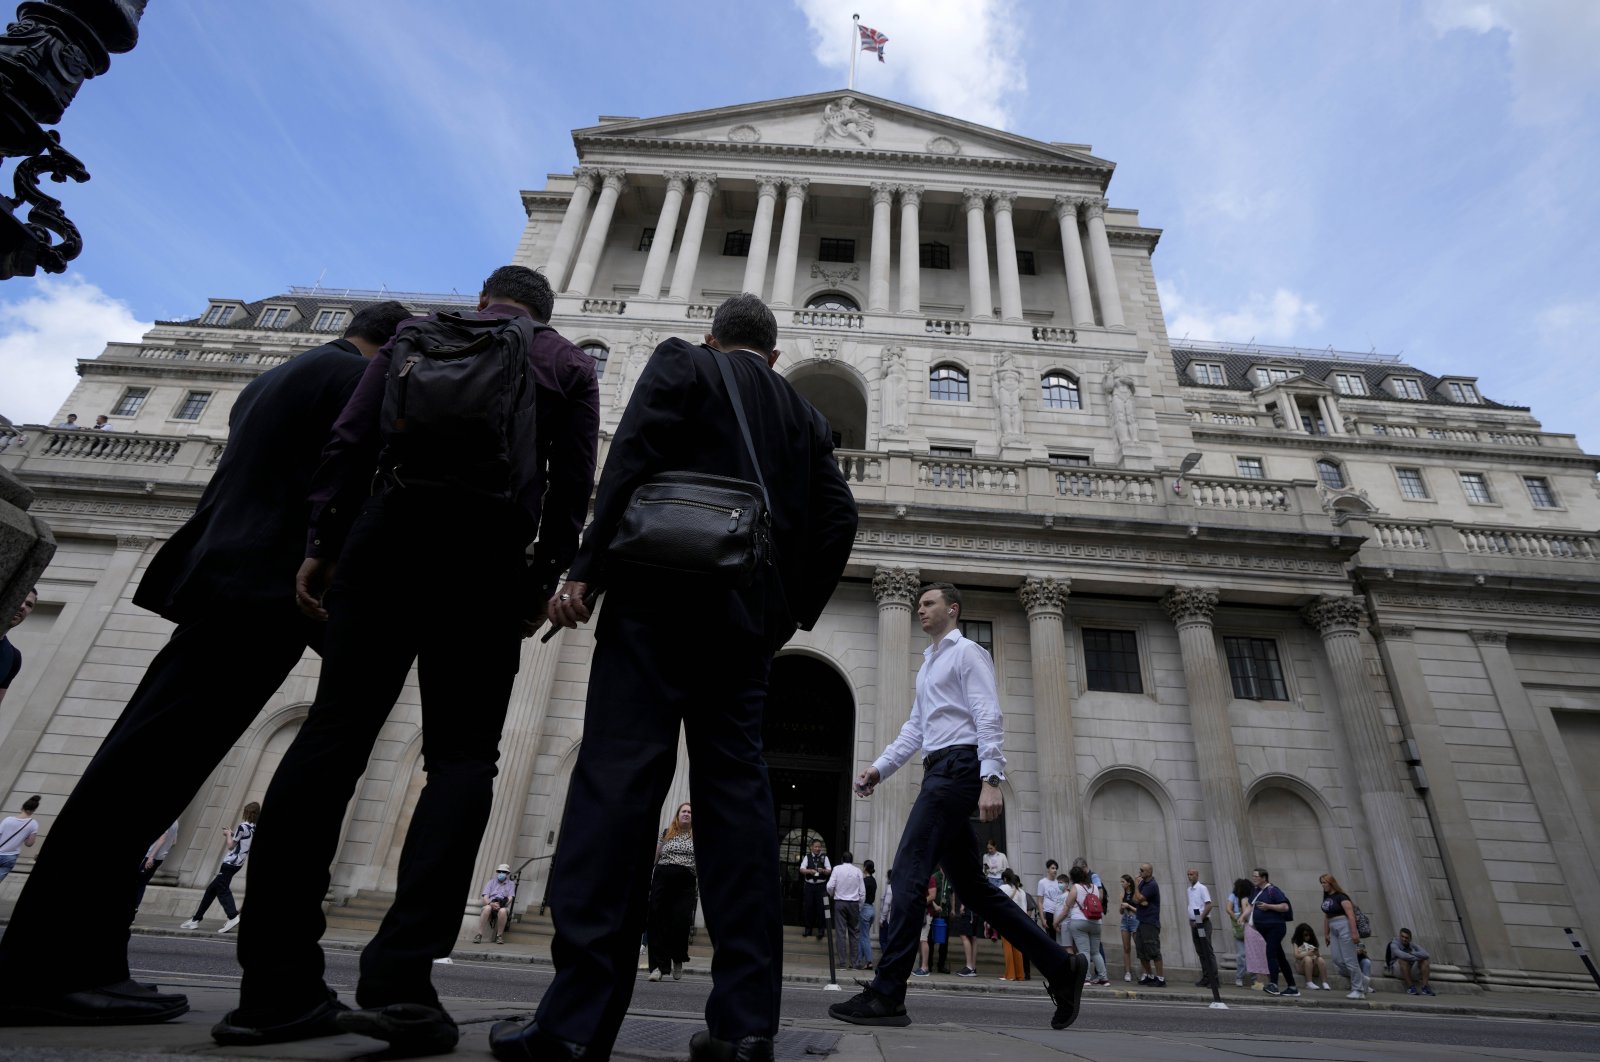 People wait at the Bank of England in London, U.K., Aug. 4, 2022. (AP Photo)